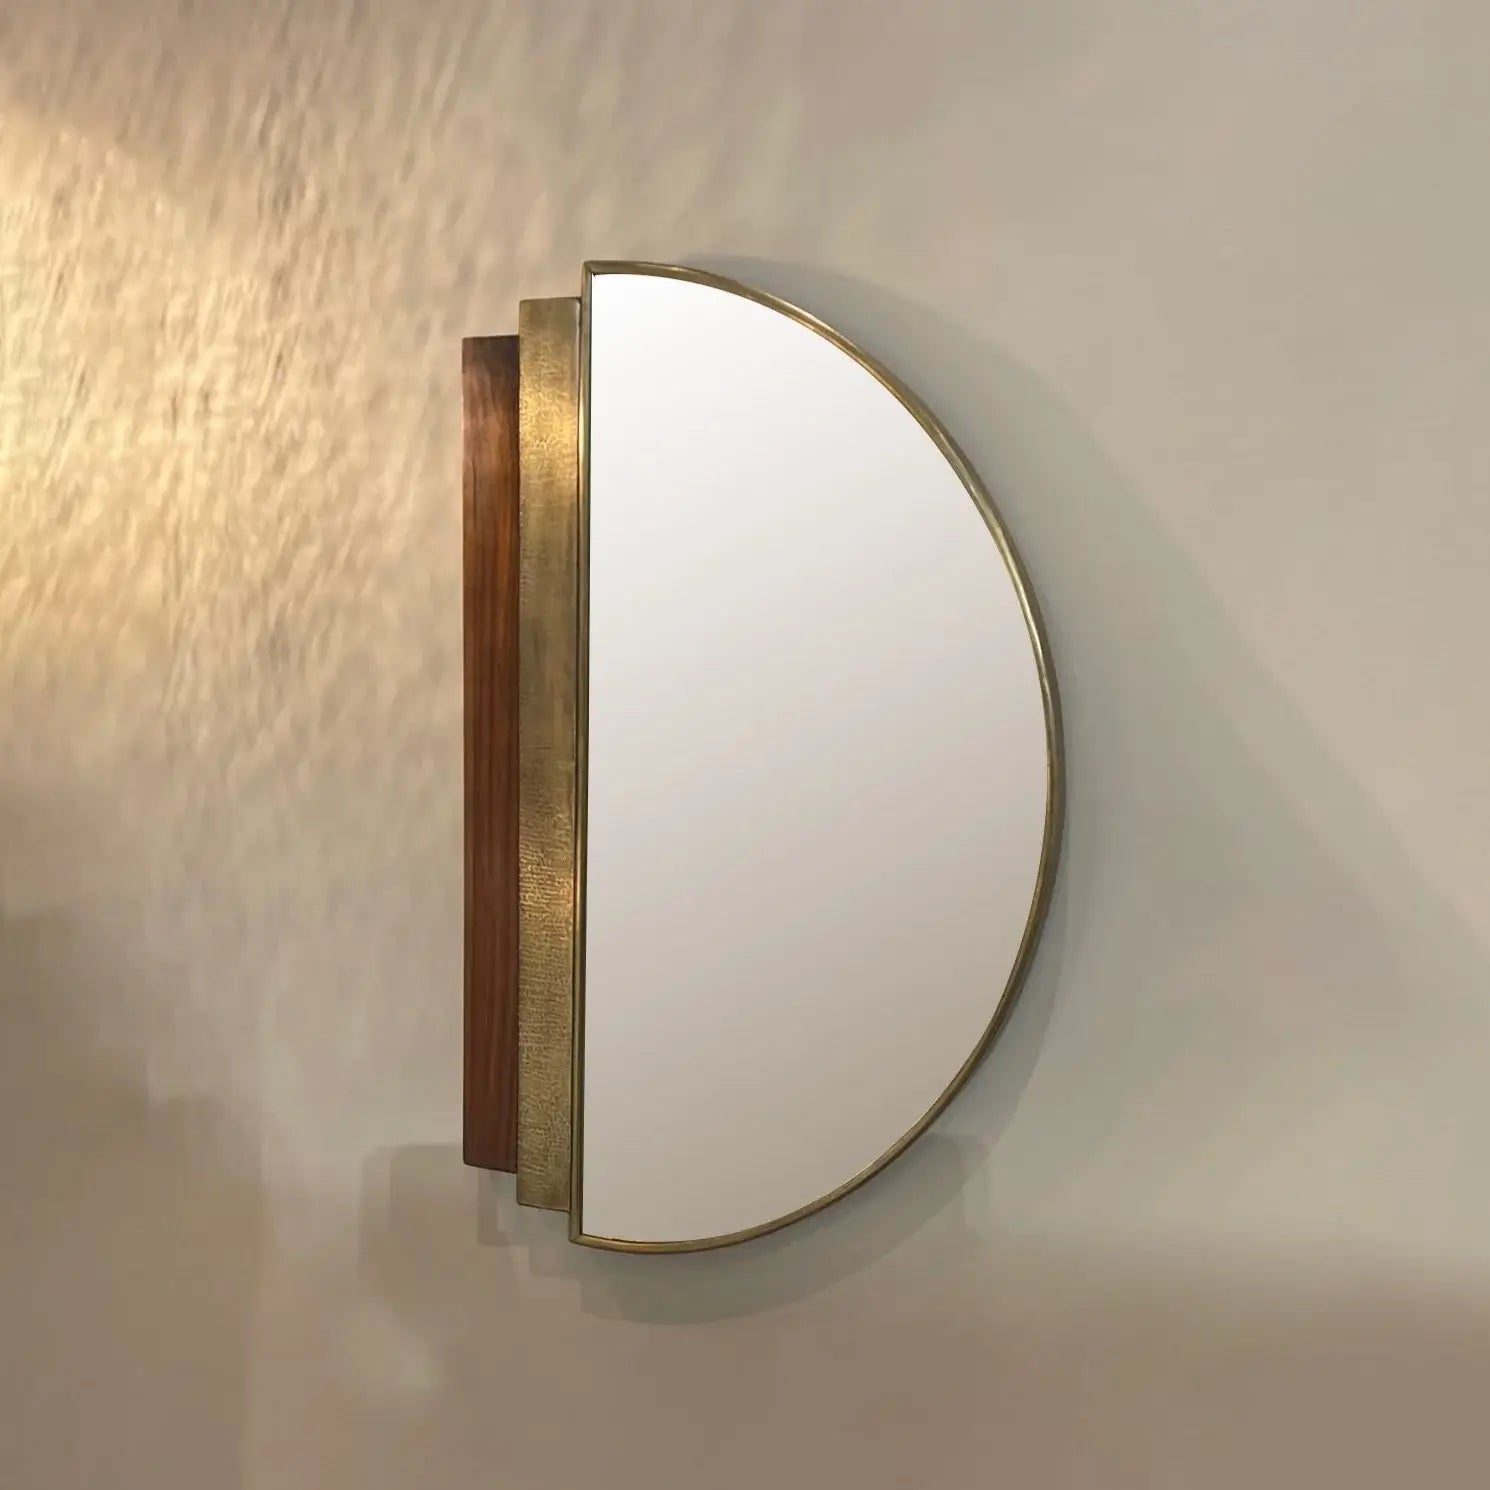 Dounia home Mirror, made of Walnut and brass, Model: Nass, Close Up View